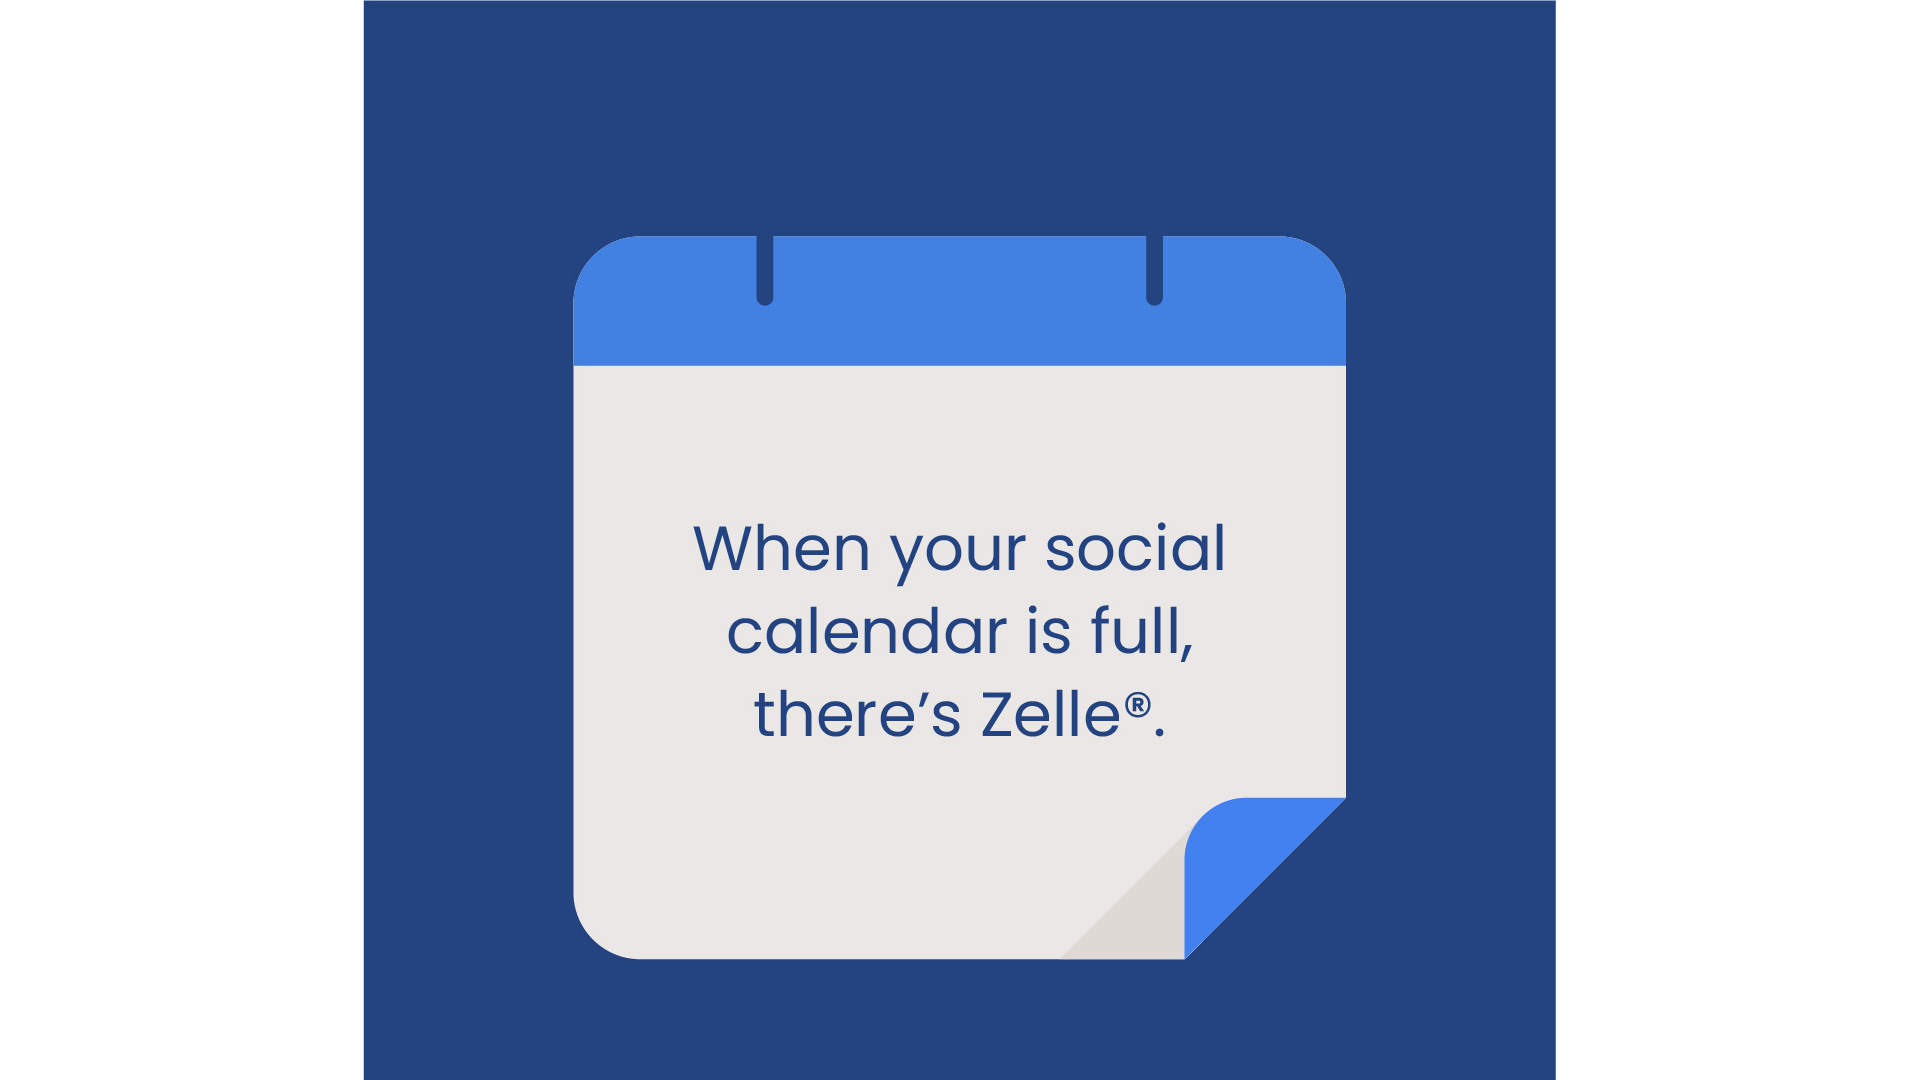 Zelle Use Cases Animation